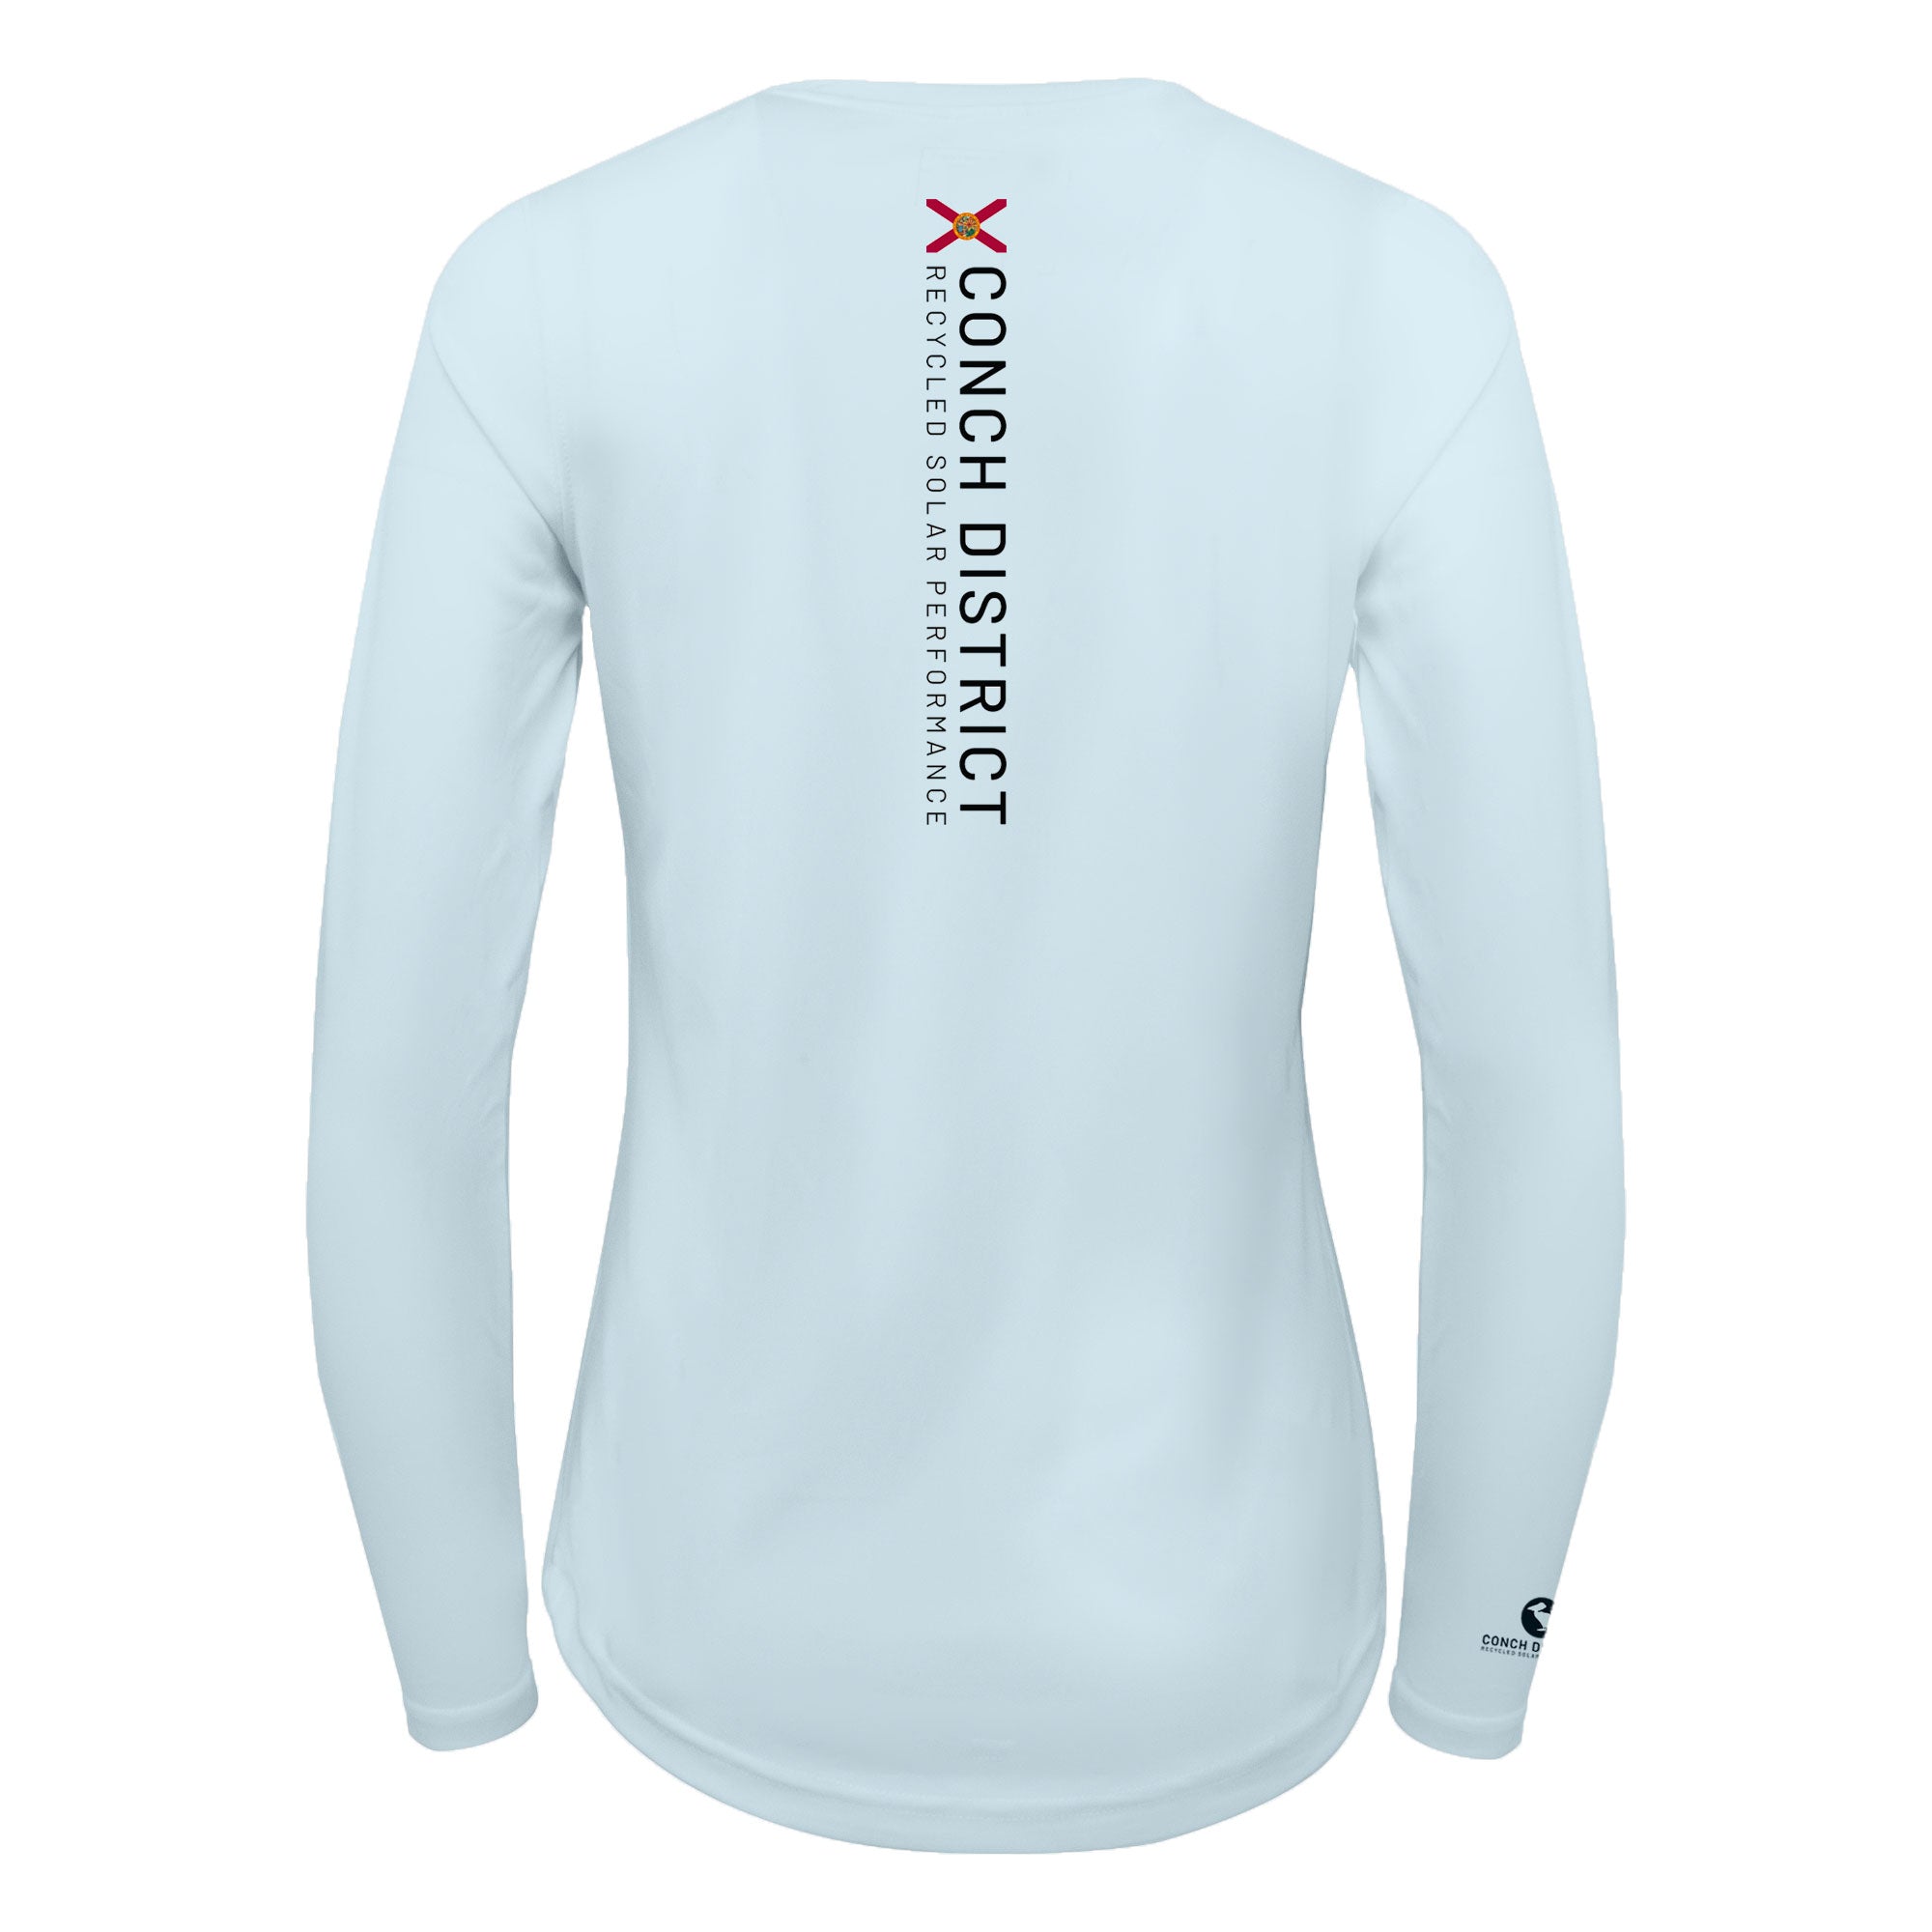 Blue Marlin Conservation Status Shirt | Womens Recycled Solar Performance